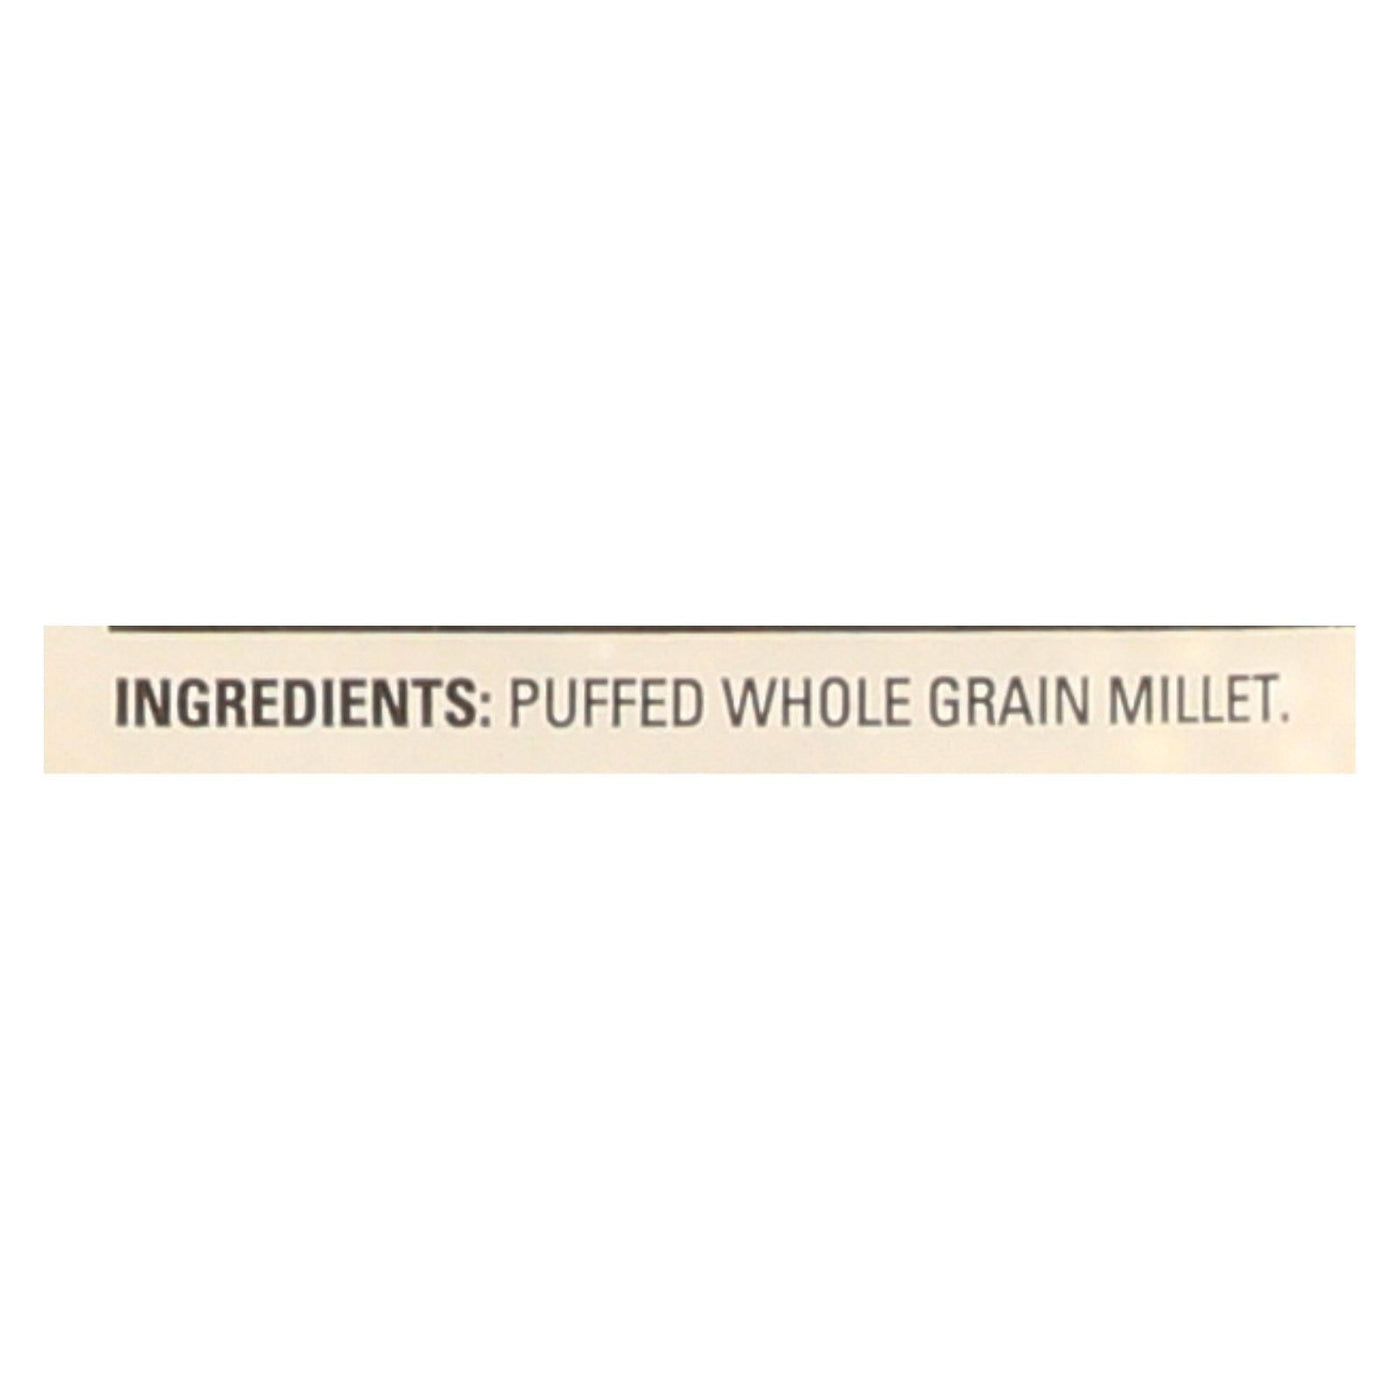 Buy Arrowhead Mills - All Natural Puffed Millet Cereal - Case Of 12 - 6 Oz.  at OnlyNaturals.us